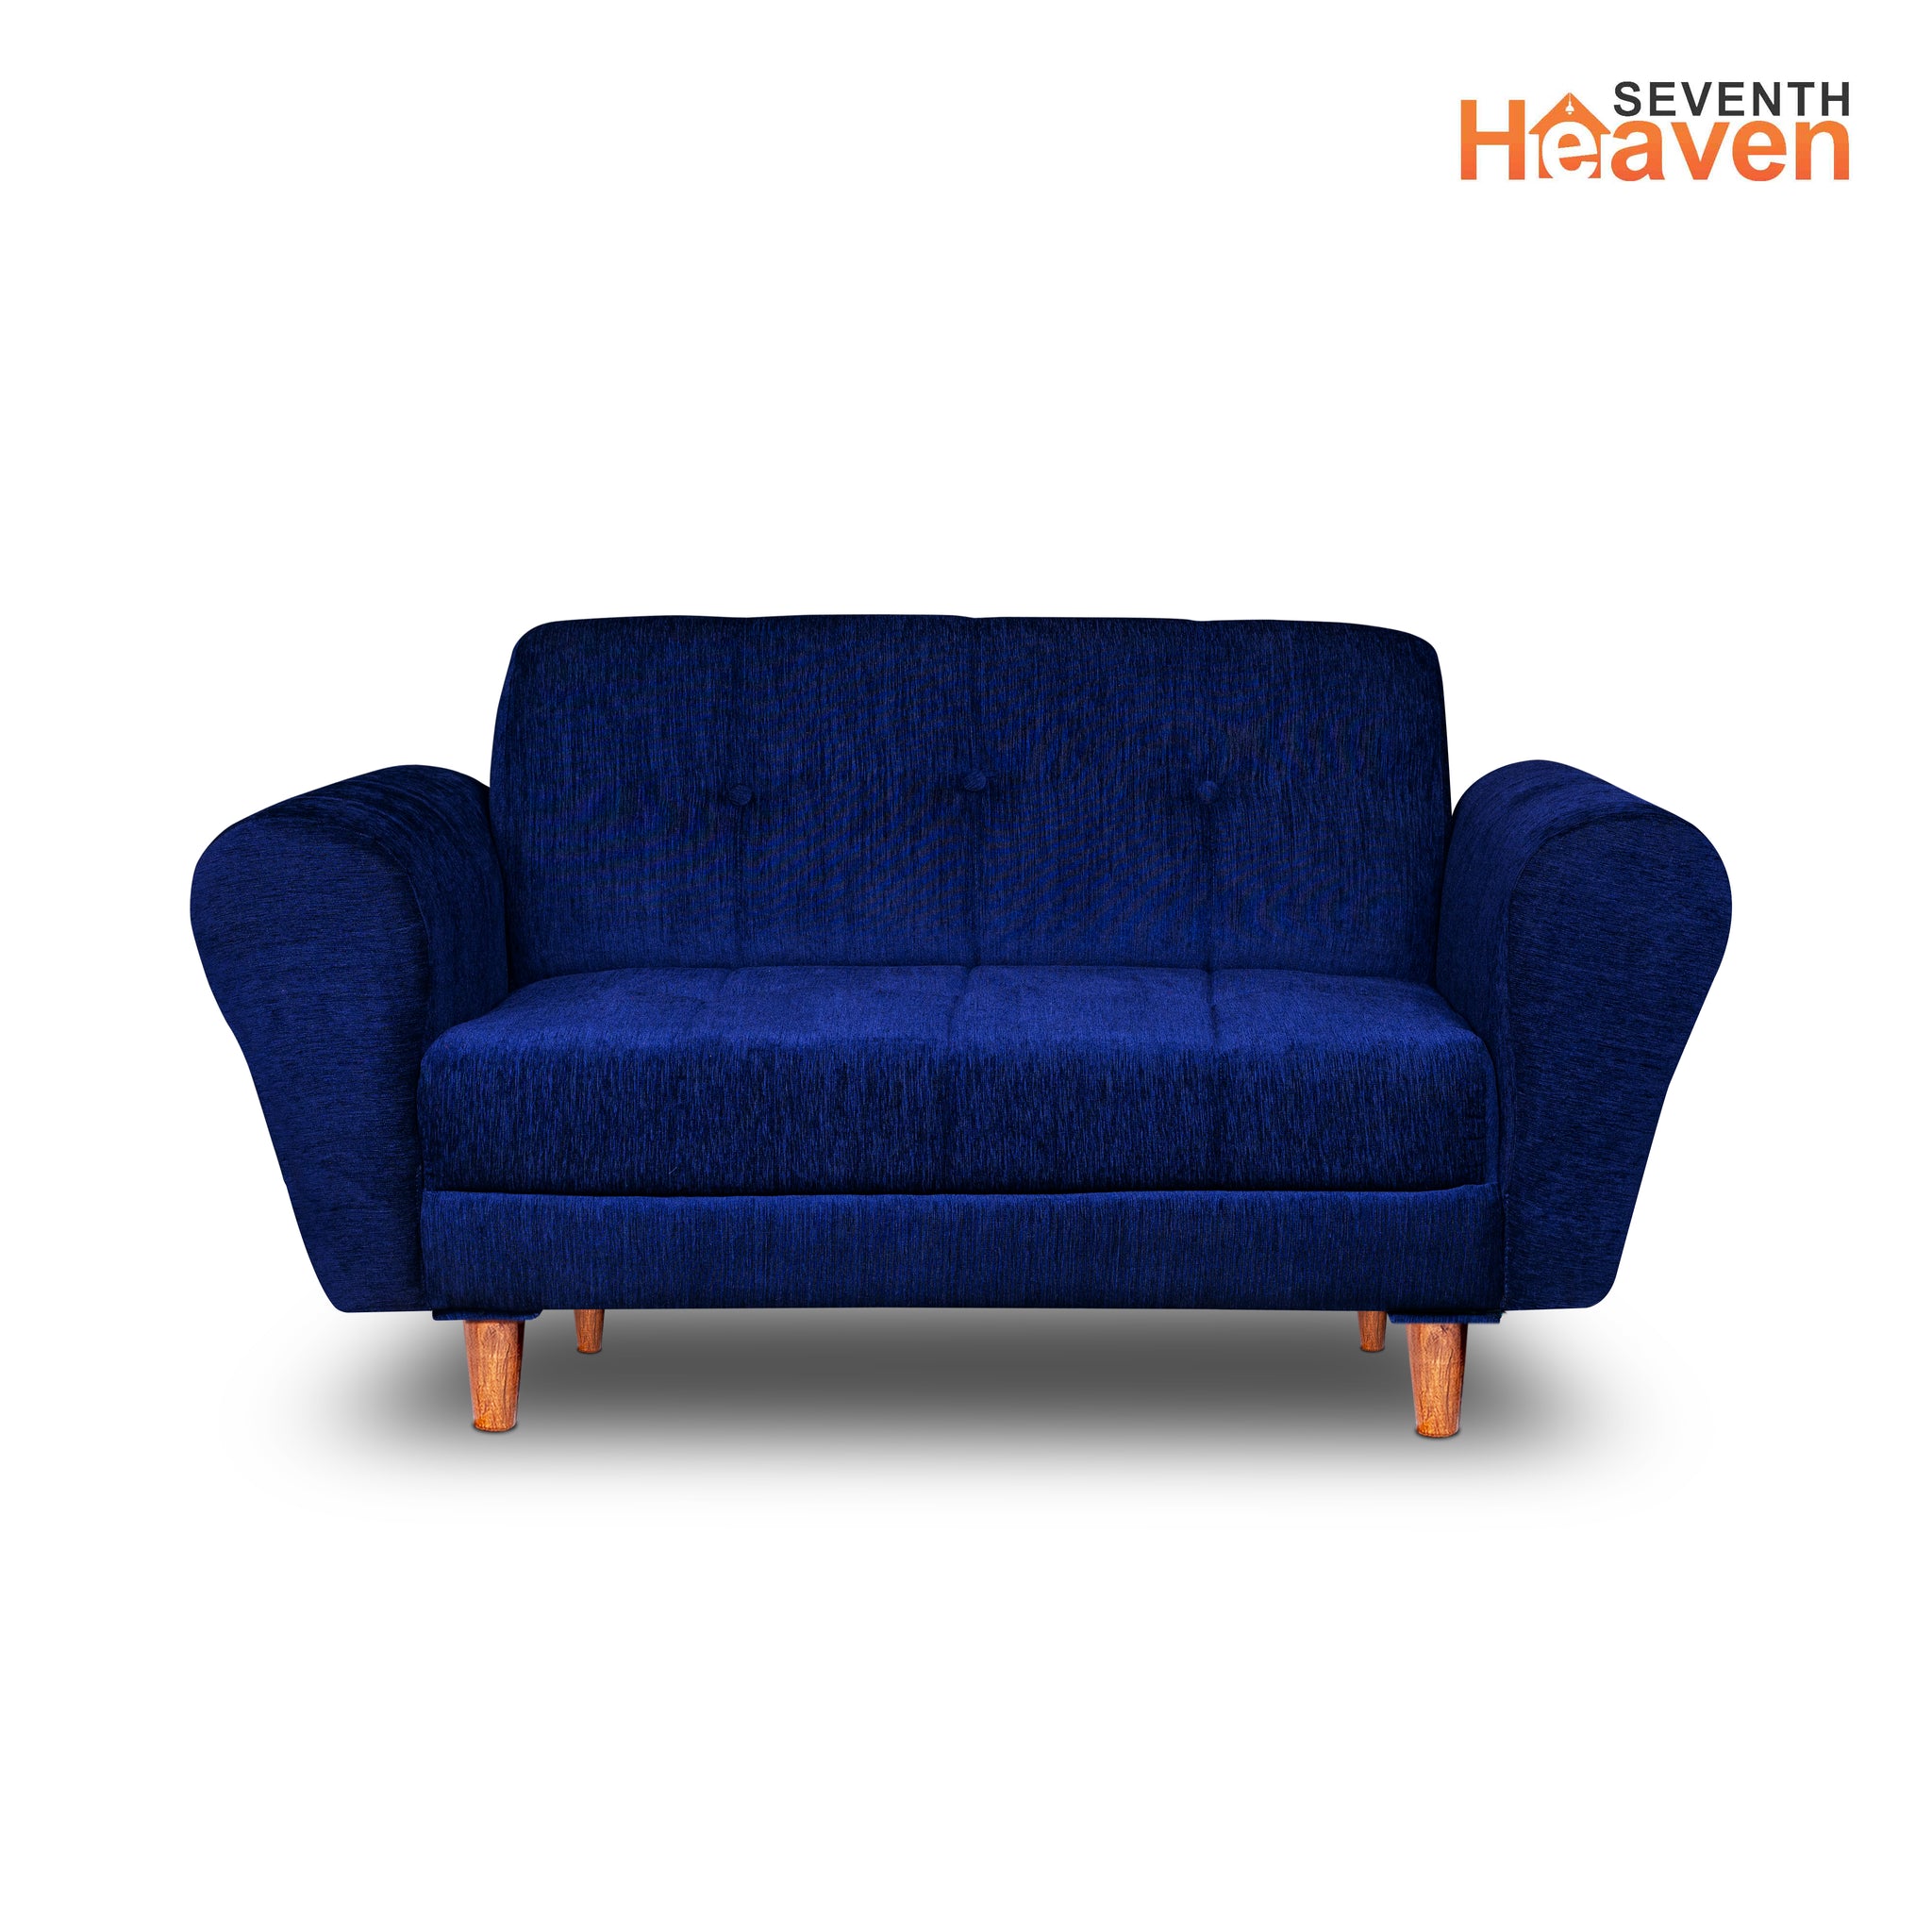 Seventh Heaven Milan 2 Seater Wooden Sofa Set Modern & Elegant Smart Furniture Range for luxurious homes, living rooms and offices. Blue Colour Molphino fabric with sheesham polished wooden legs.